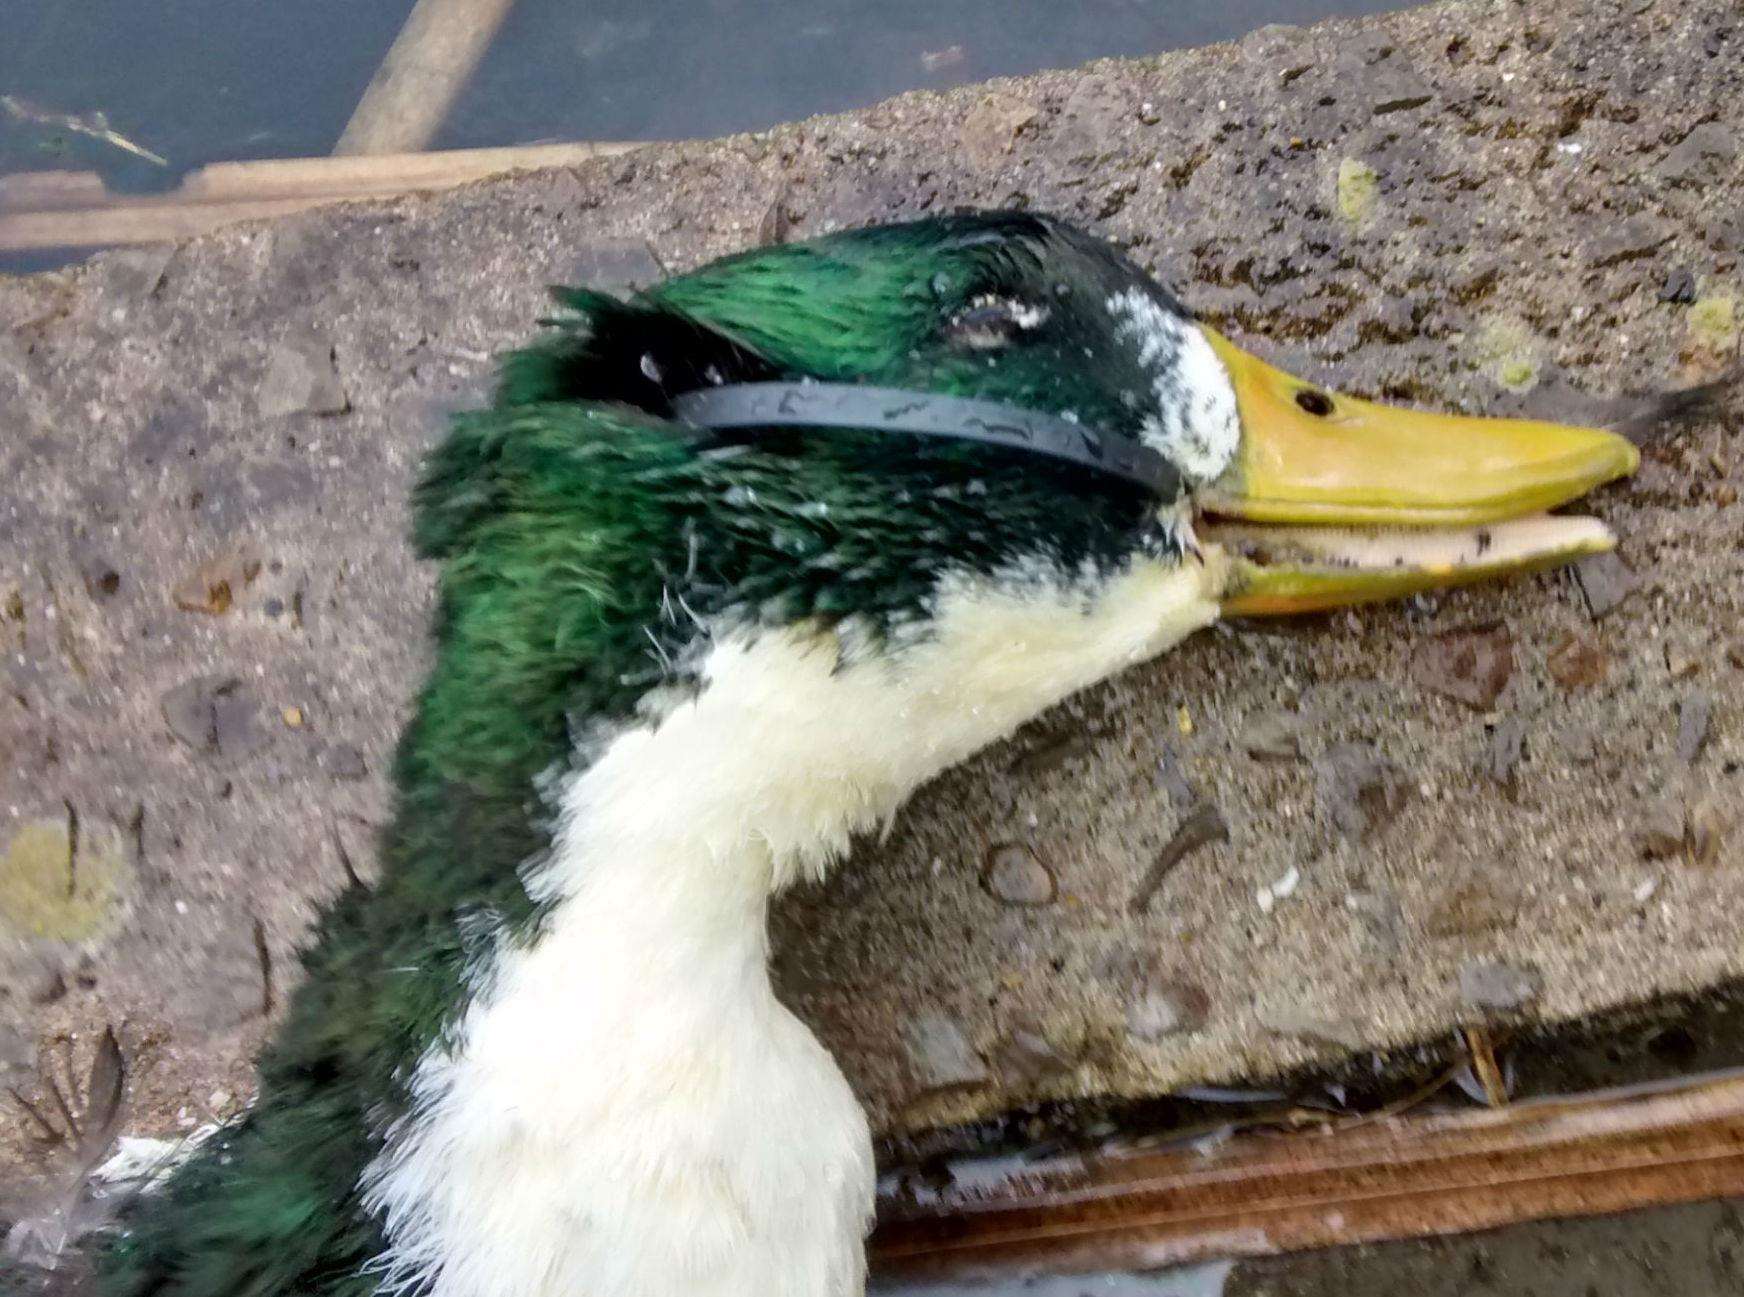 This duck died because some plastic got stuck on his bill (6926183)